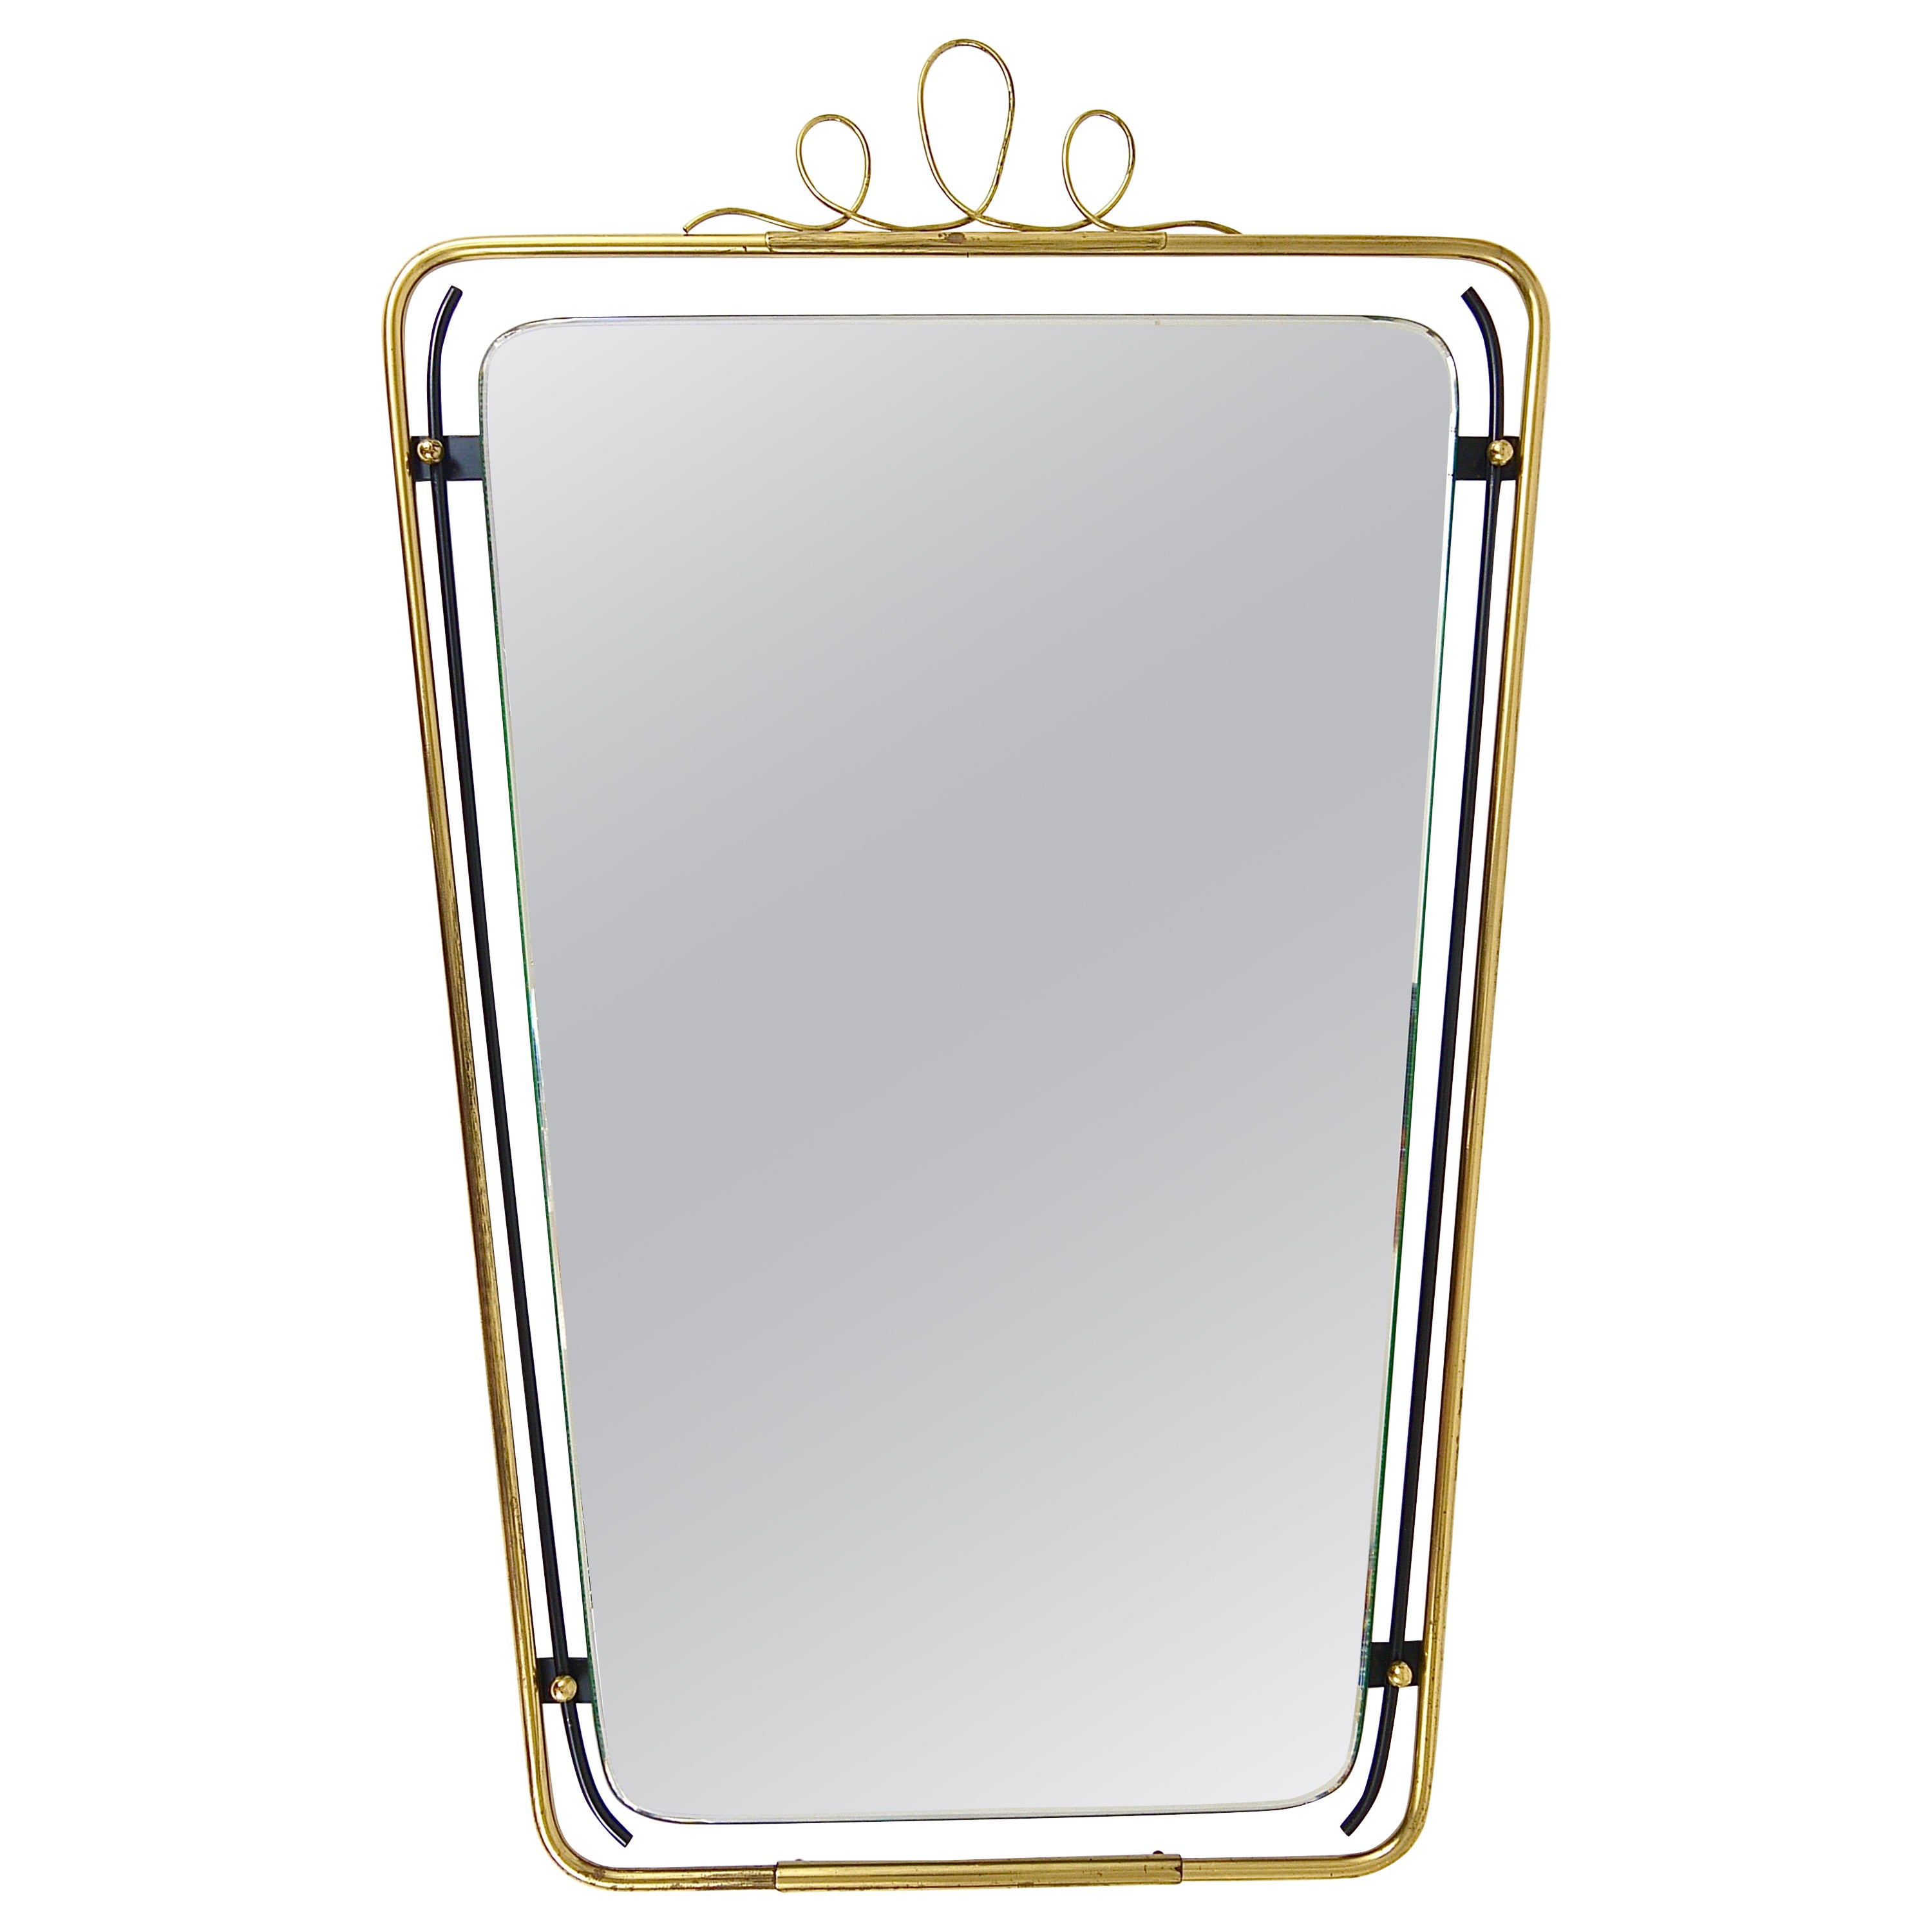 Midcentury Modern Brass Loops Wire Wall mirror, Italy, 1950s For Sale